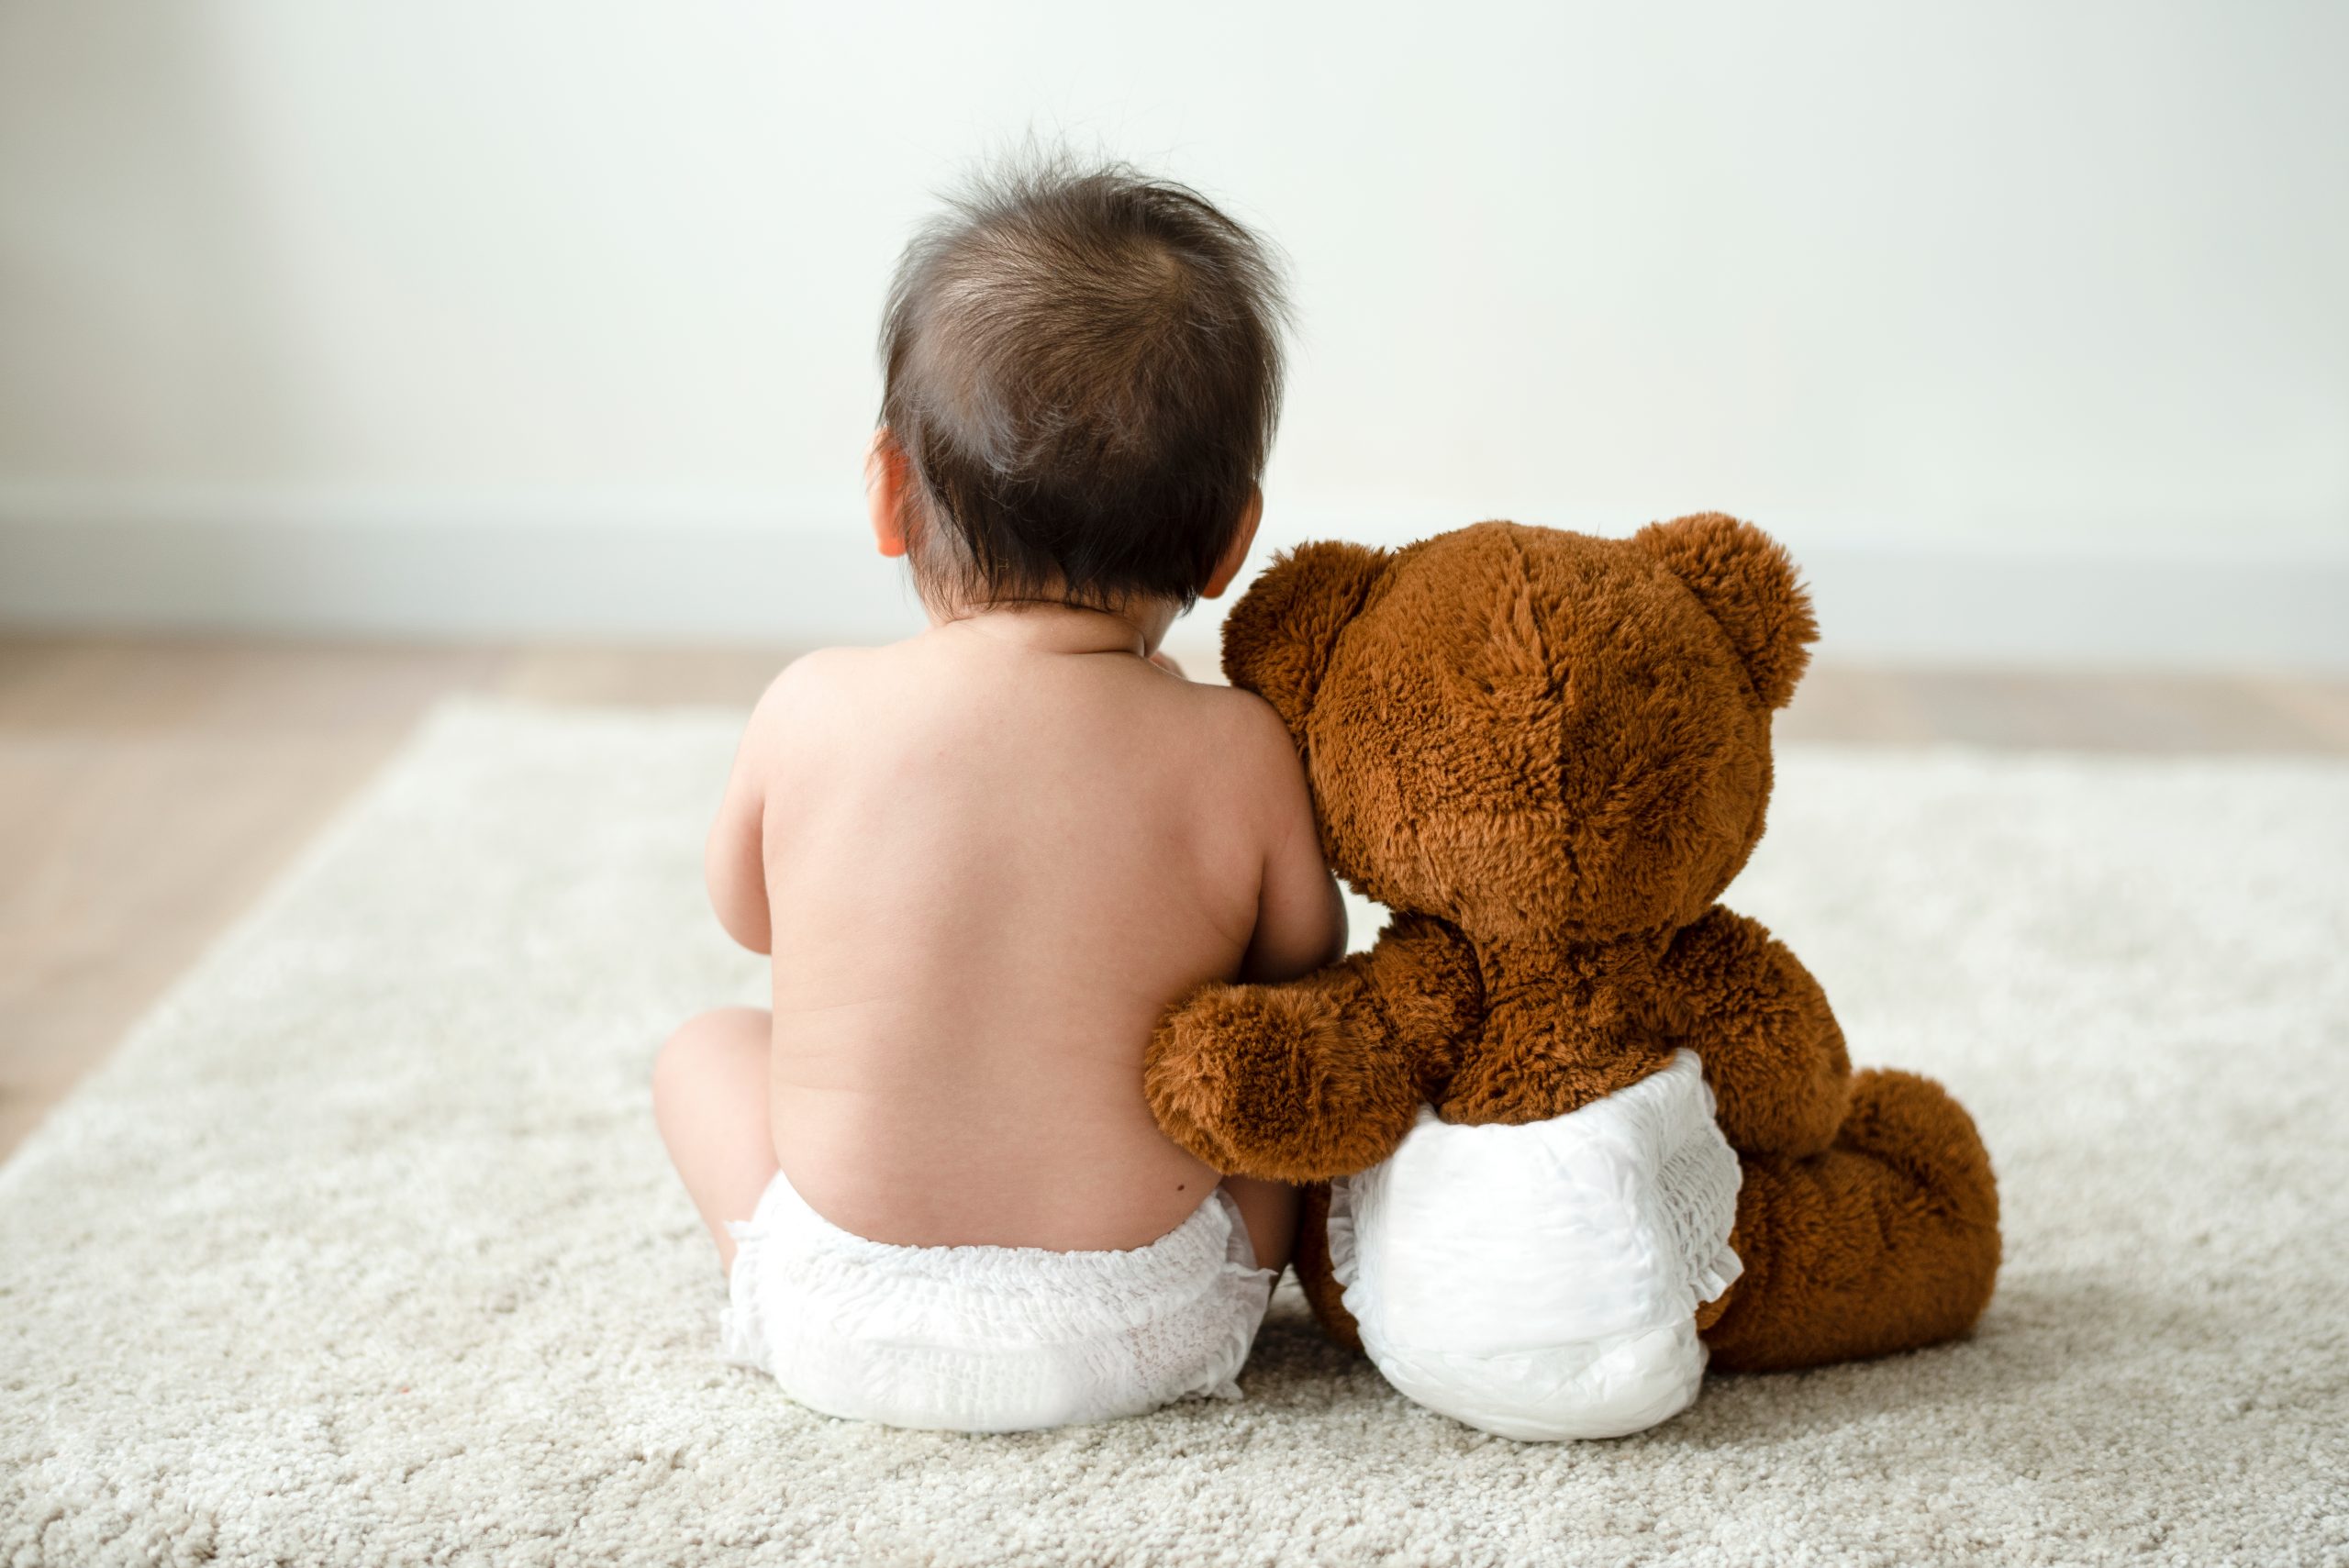 Baby in diaper sitting next to stuffed bear